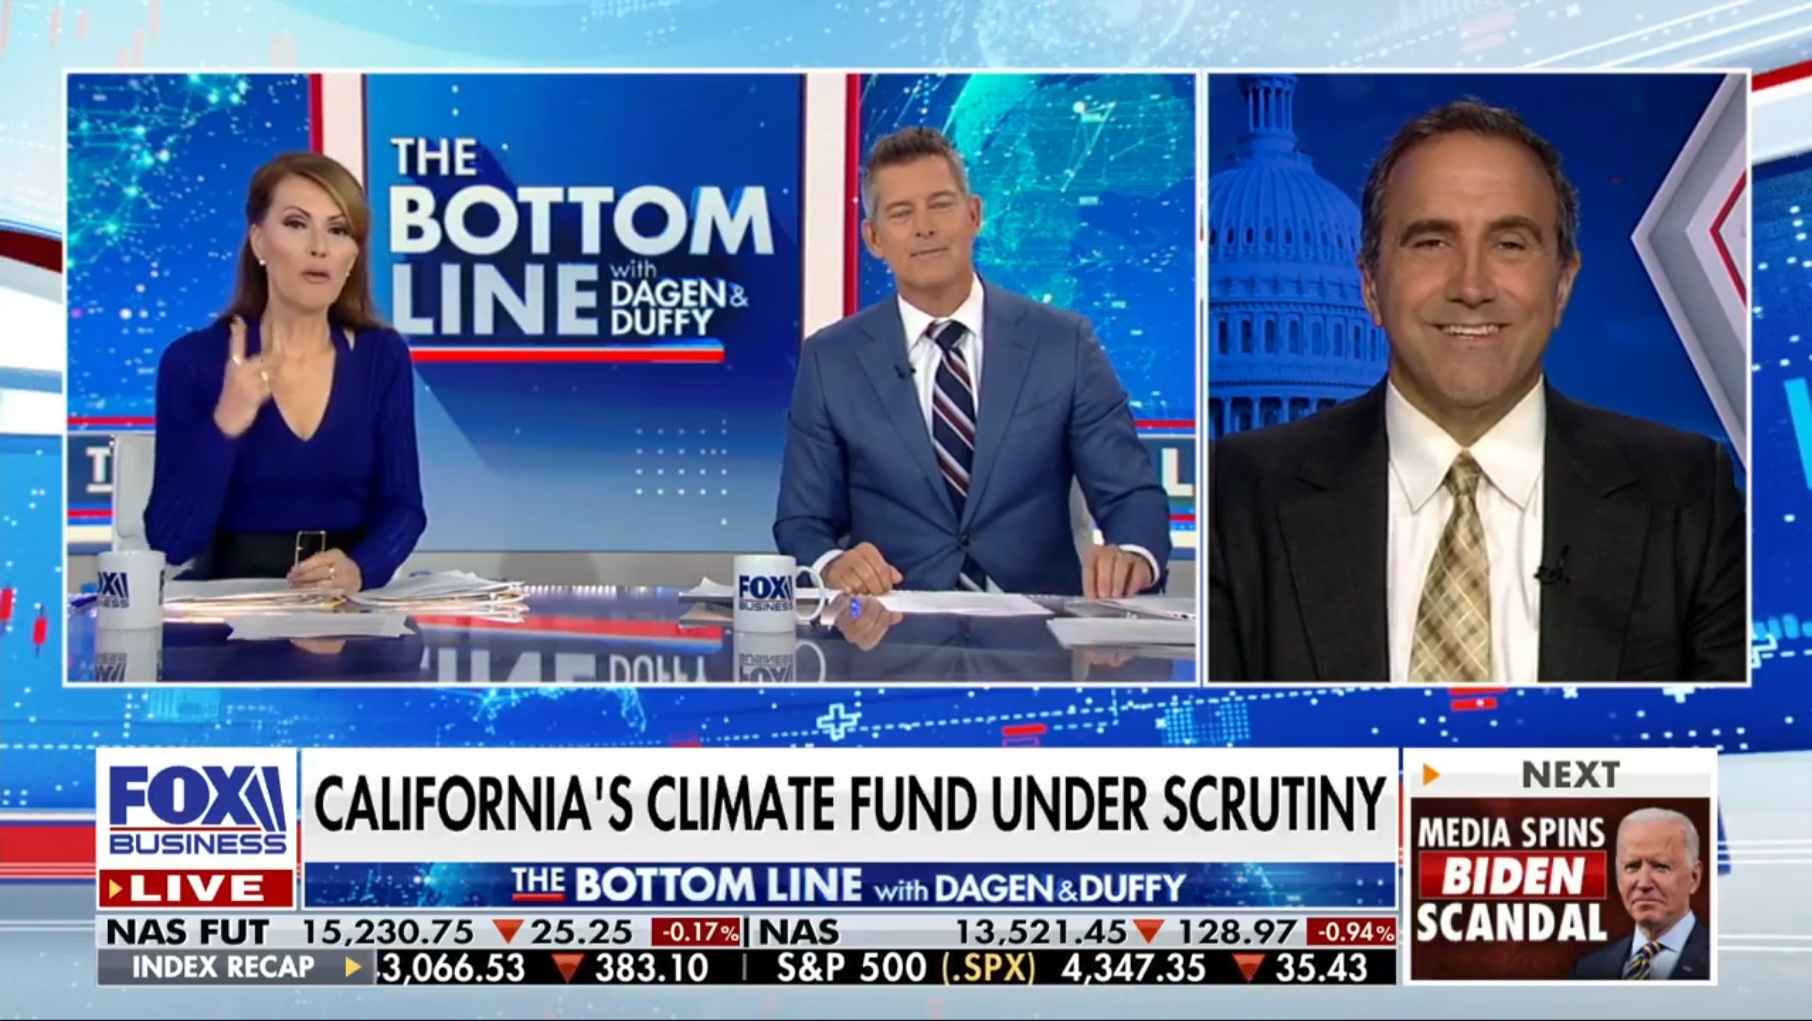 Watch: Morano on Fox News: ‘This is a good development’ that California can’t spend massive influx of ‘federal climate cash’ to ‘advance climate action’ – Plus Google’s EV bus crash